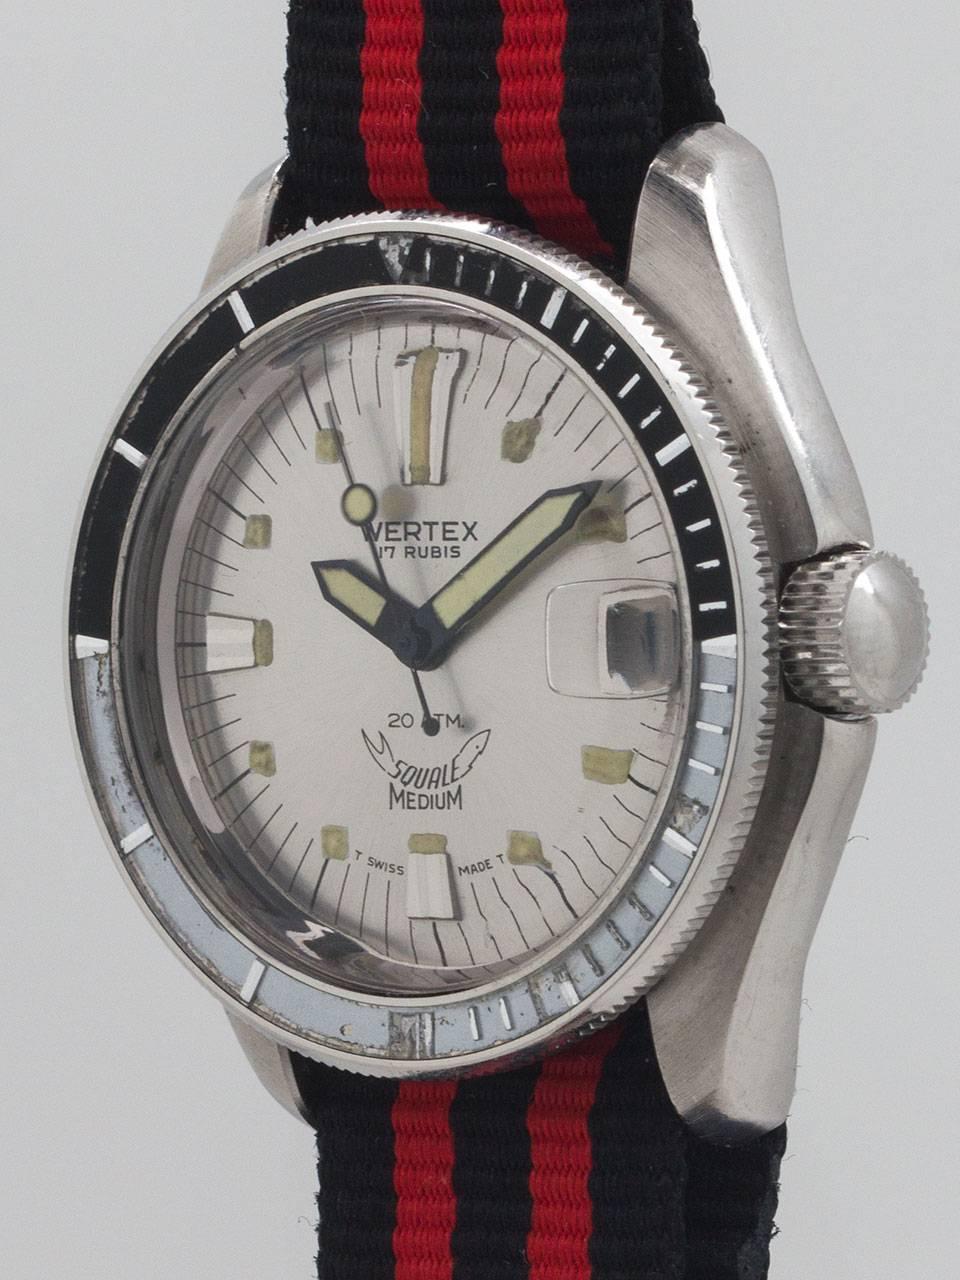 
Wertex Squale Swiss Diver’s circa 1960s. Featuring 35 X 40mm screw back case, acrylic crystal, black and white bakelite elapsed time bezel, and great looking original white “radius”  dial with luminous indexes and oversized luminous hands. Powered